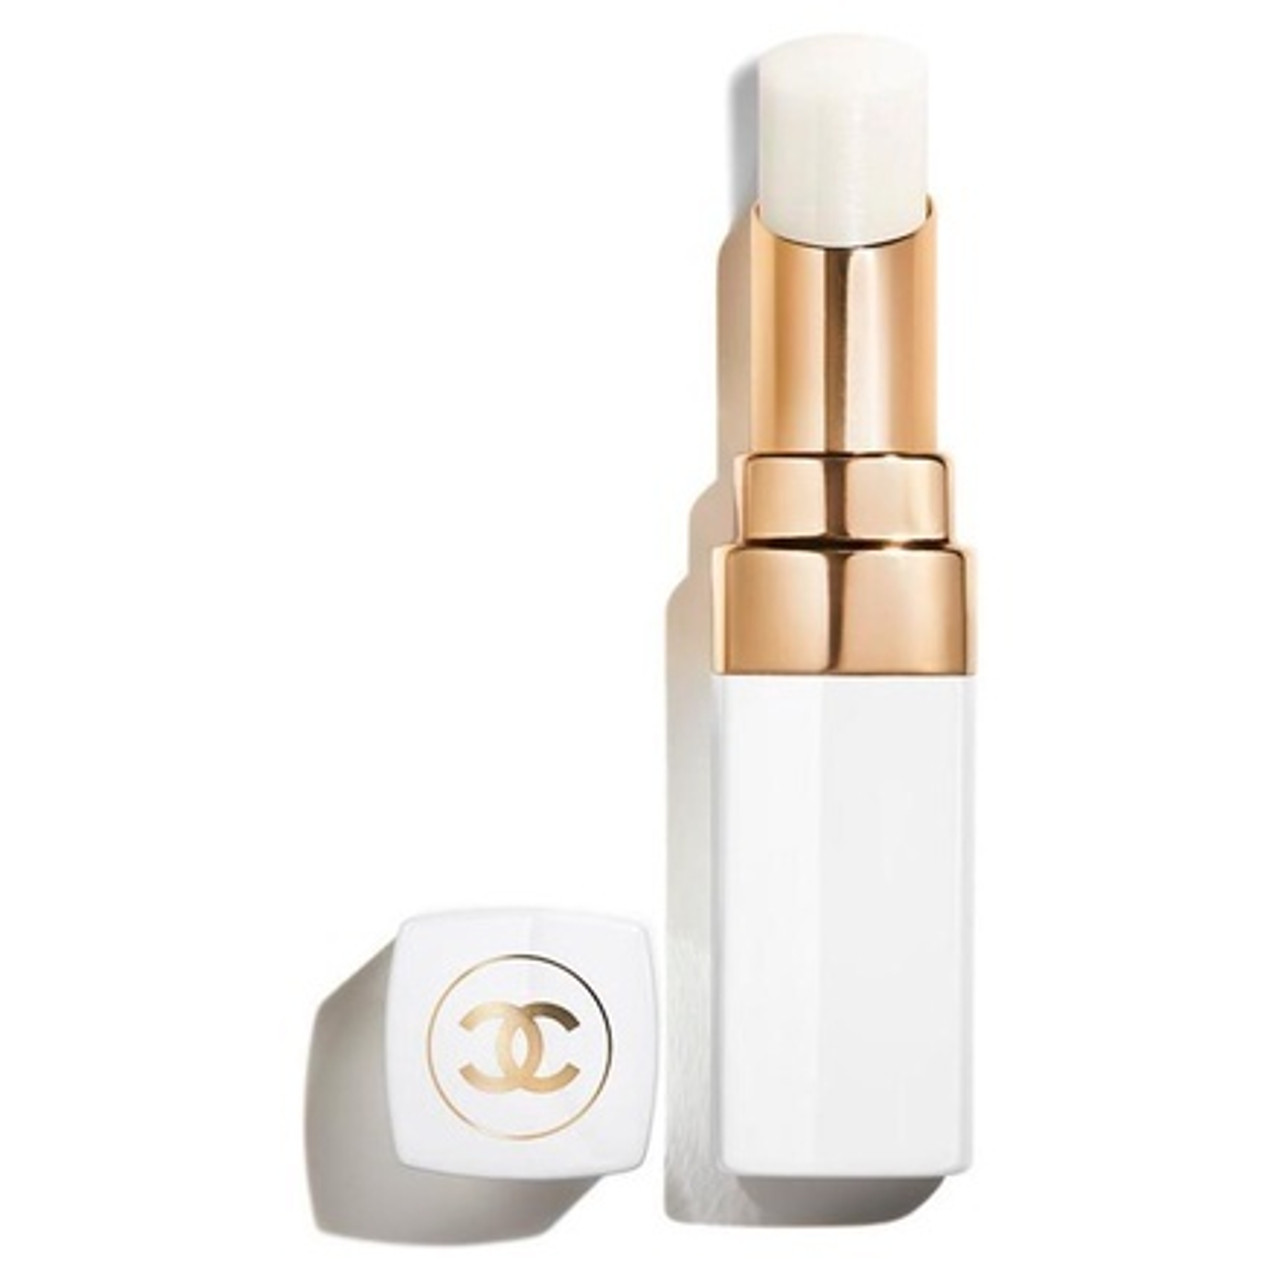 Chanel Hydrating Lip Balm ~ Chanel has reinvented lip balm and